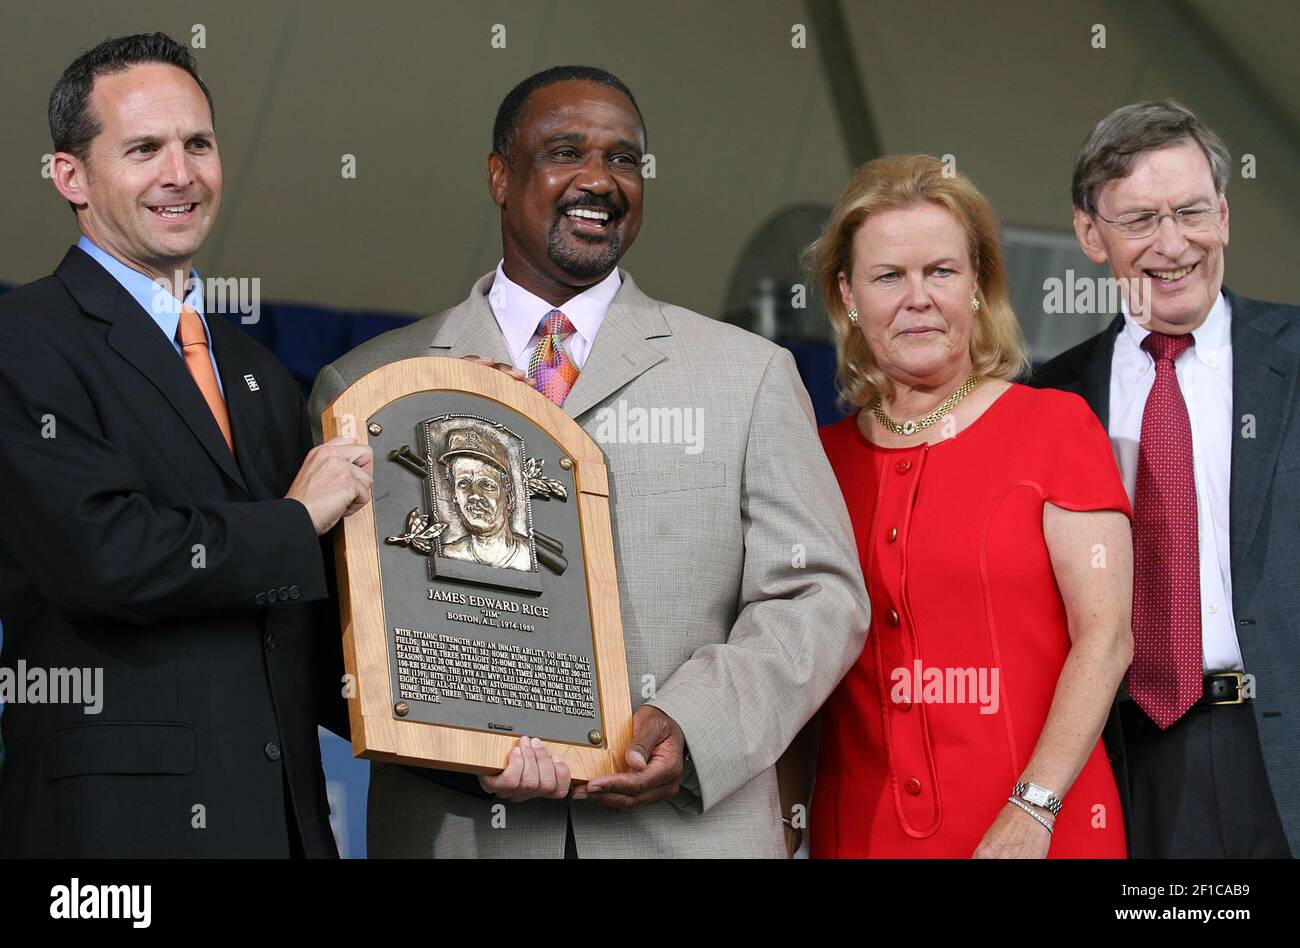 Henderson, Rice elected to baseball Hall of Fame